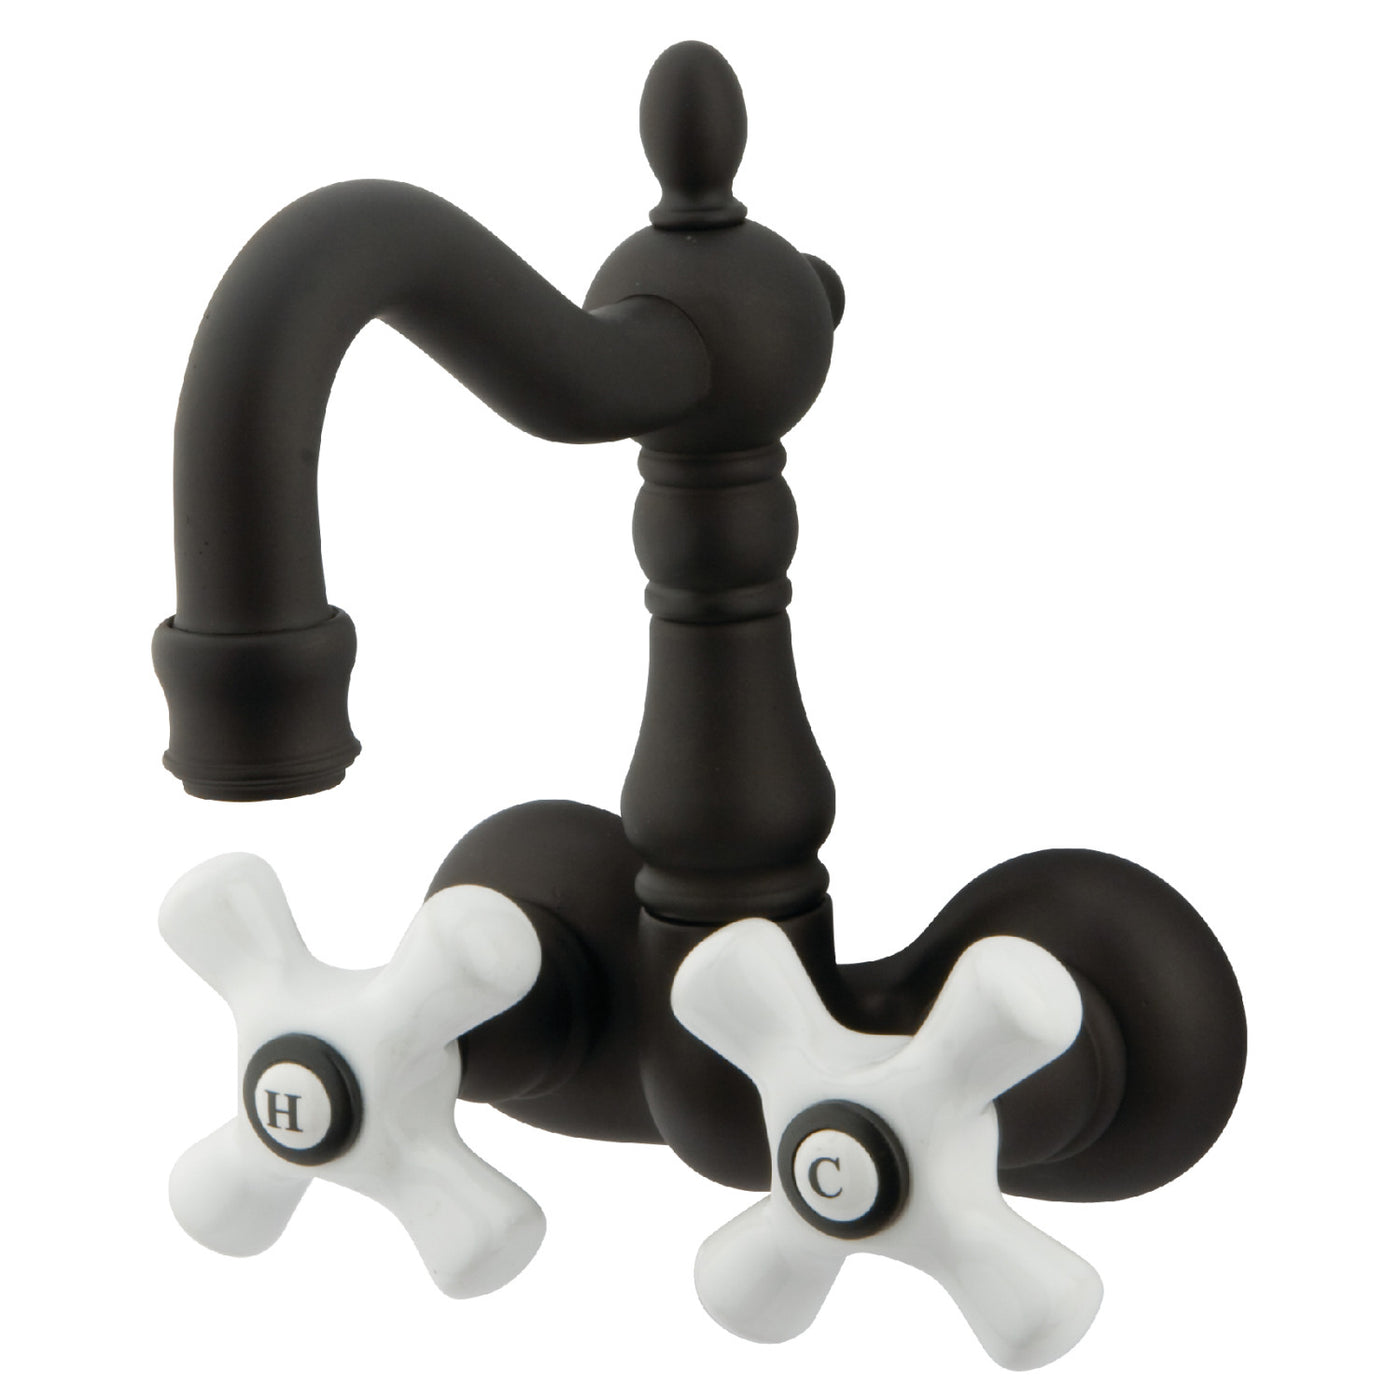 Elements of Design DT10715PX 3-3/8-Inch Wall Mount Tub Faucet, Oil Rubbed Bronze